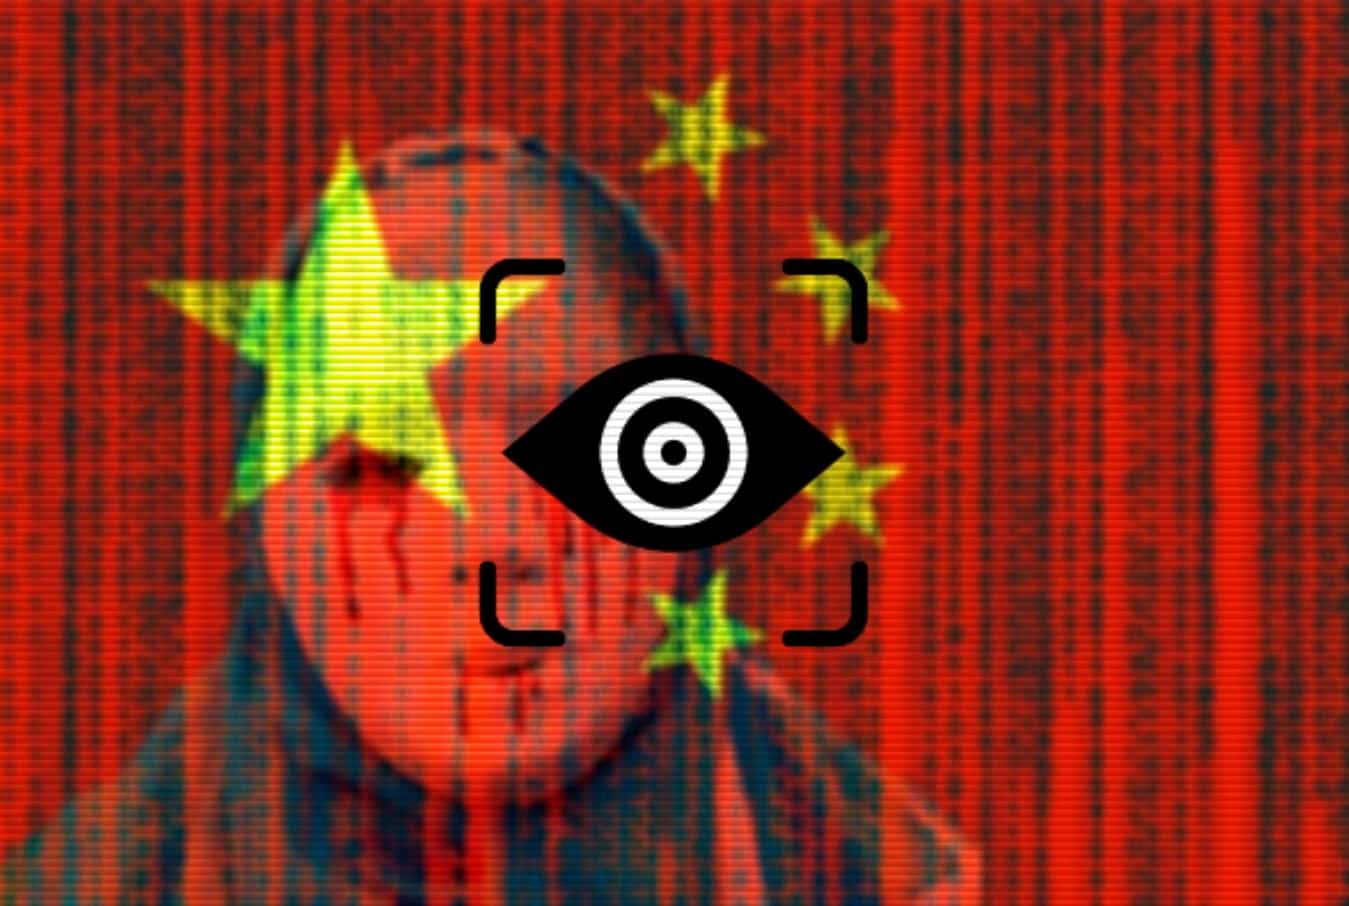 China is spying on Uyghurs and Tibetans through malware since 2013